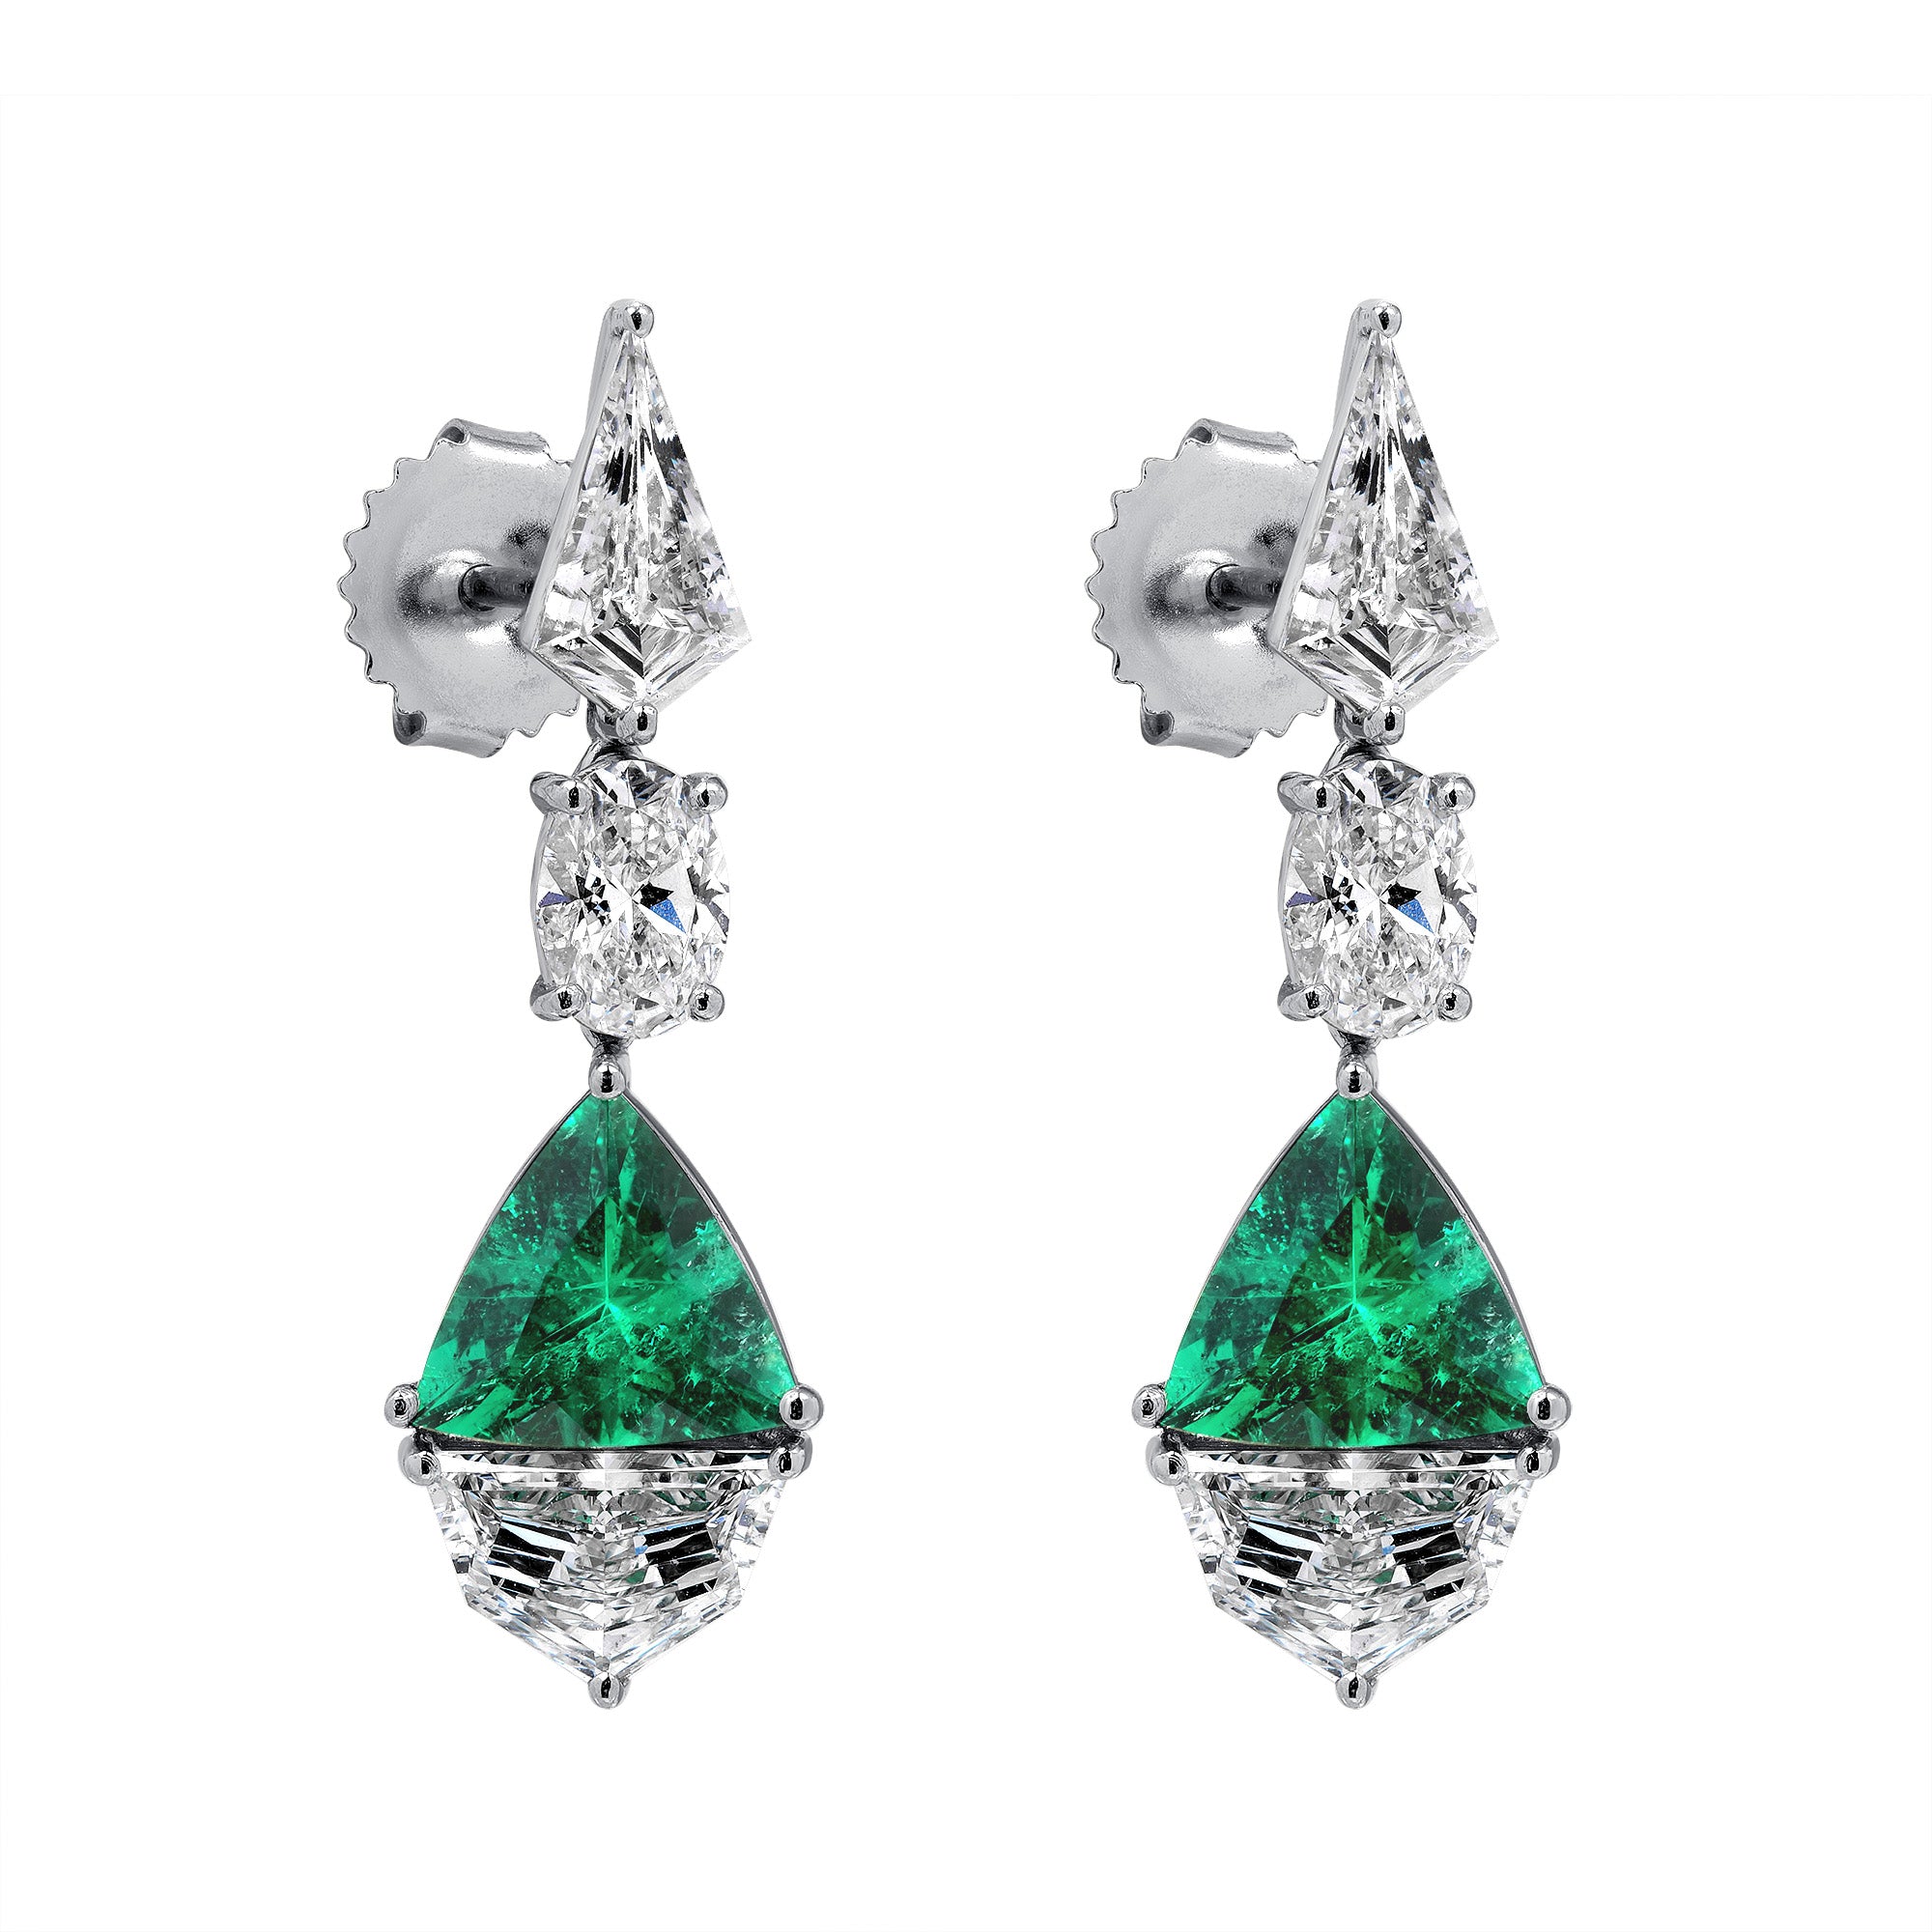 Platinum Triangle Colombian Emerald and Cadillac Oval Kite Shape Diamond Dangling Earrings